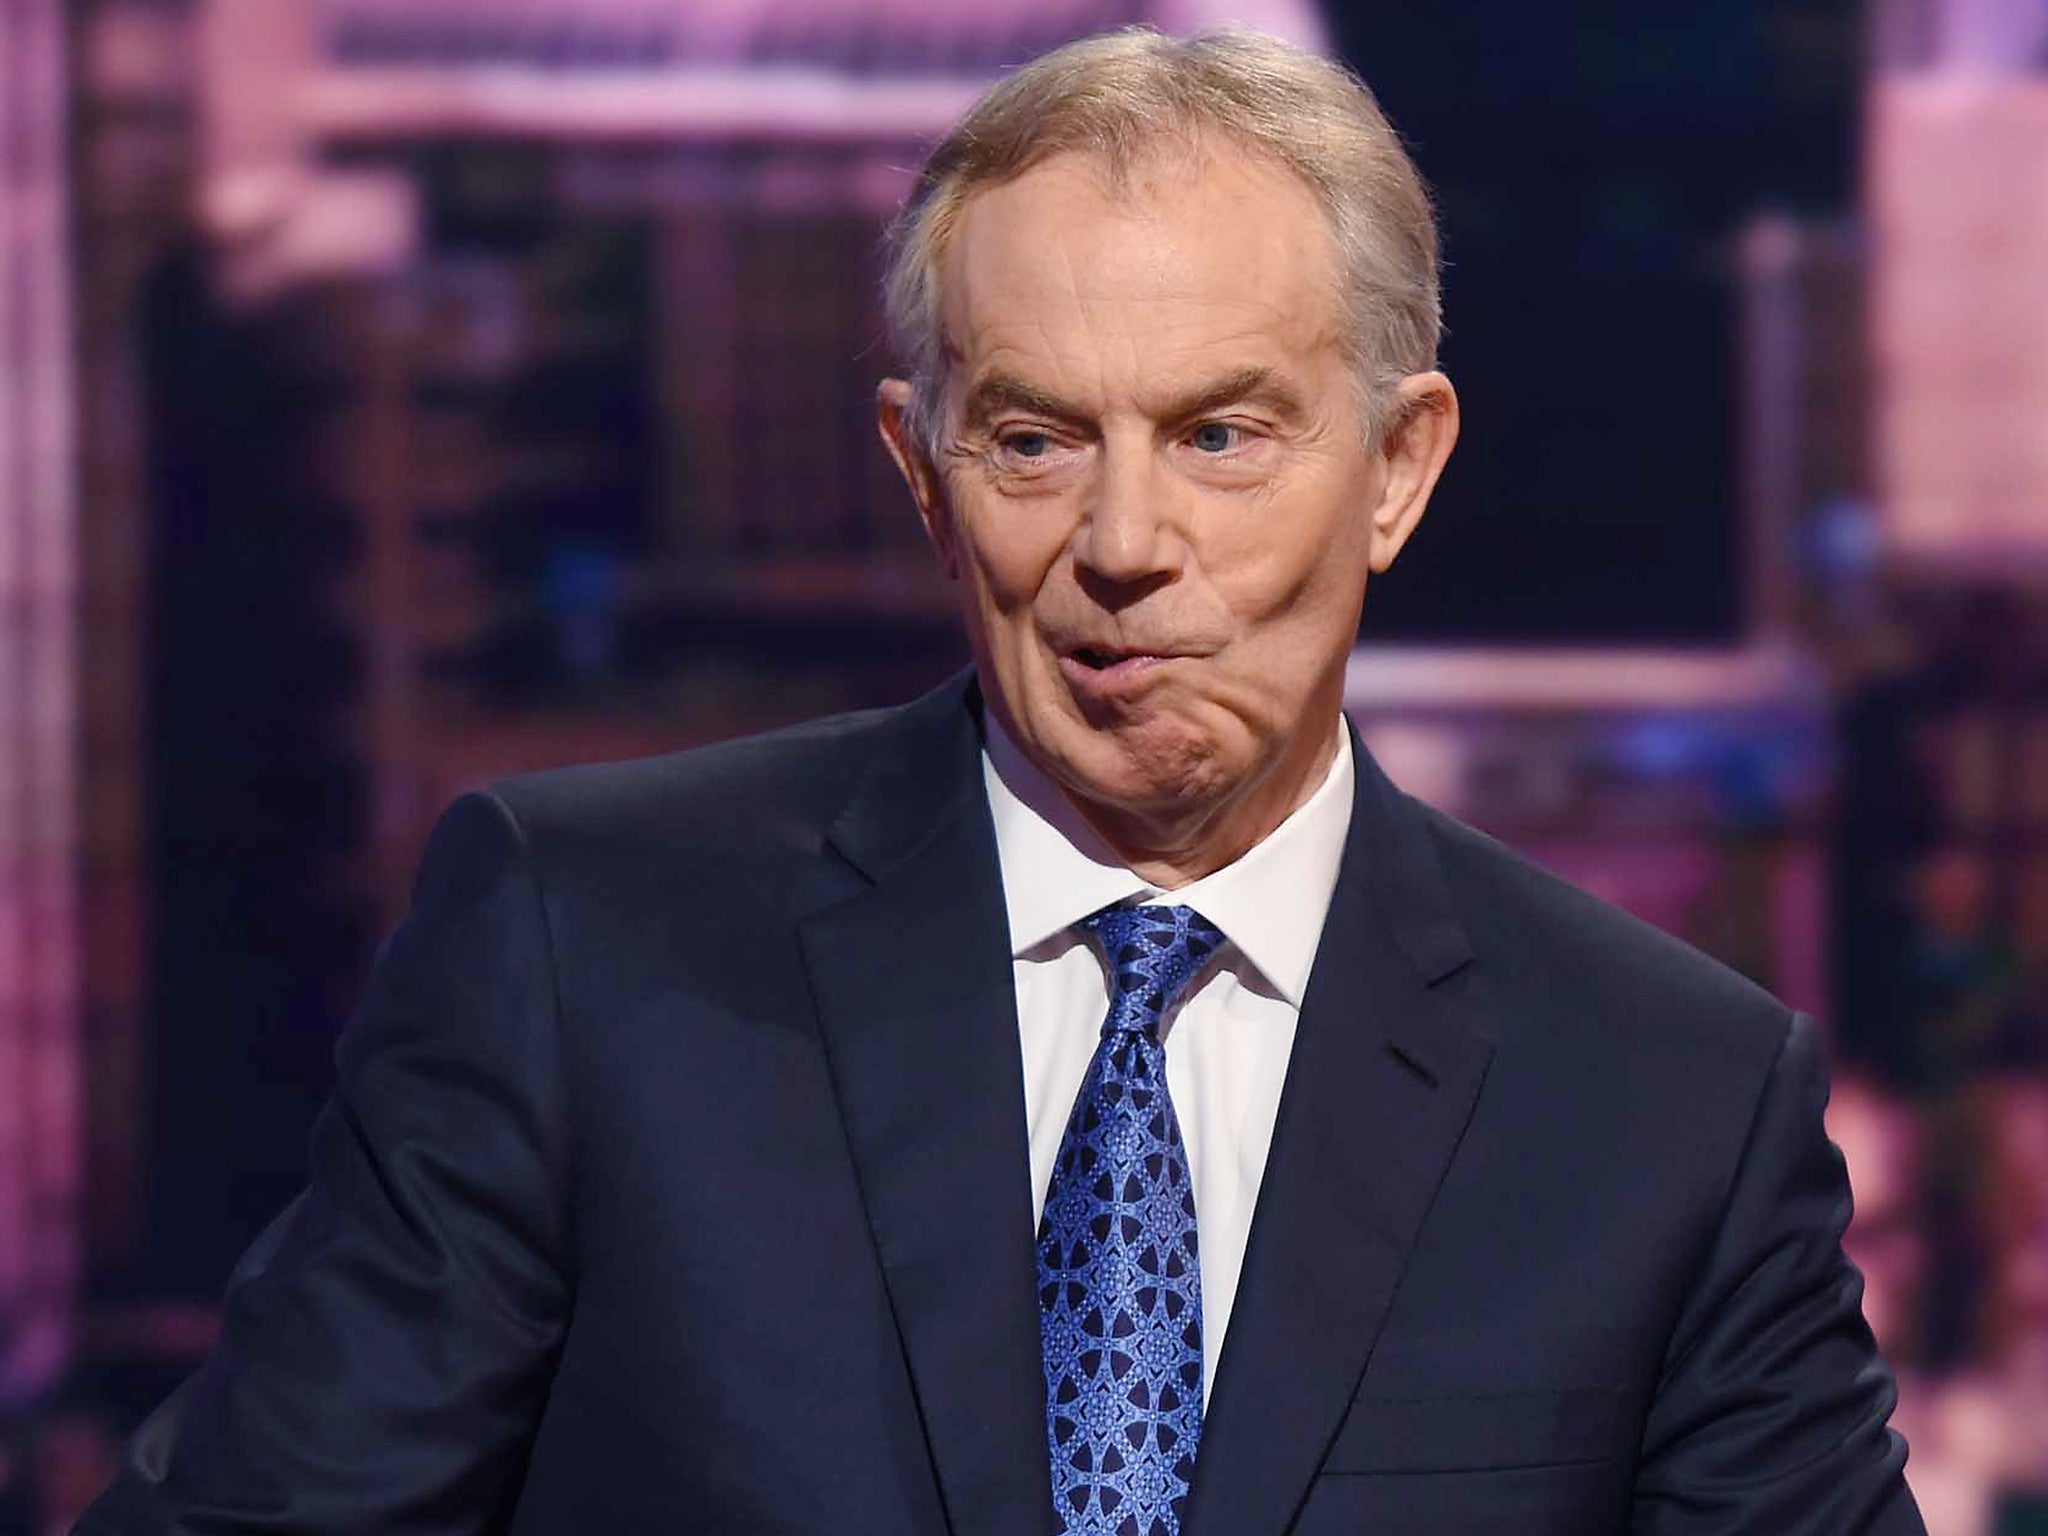 Tony Blair wants people to vote for candidates according to their stance on Brexit